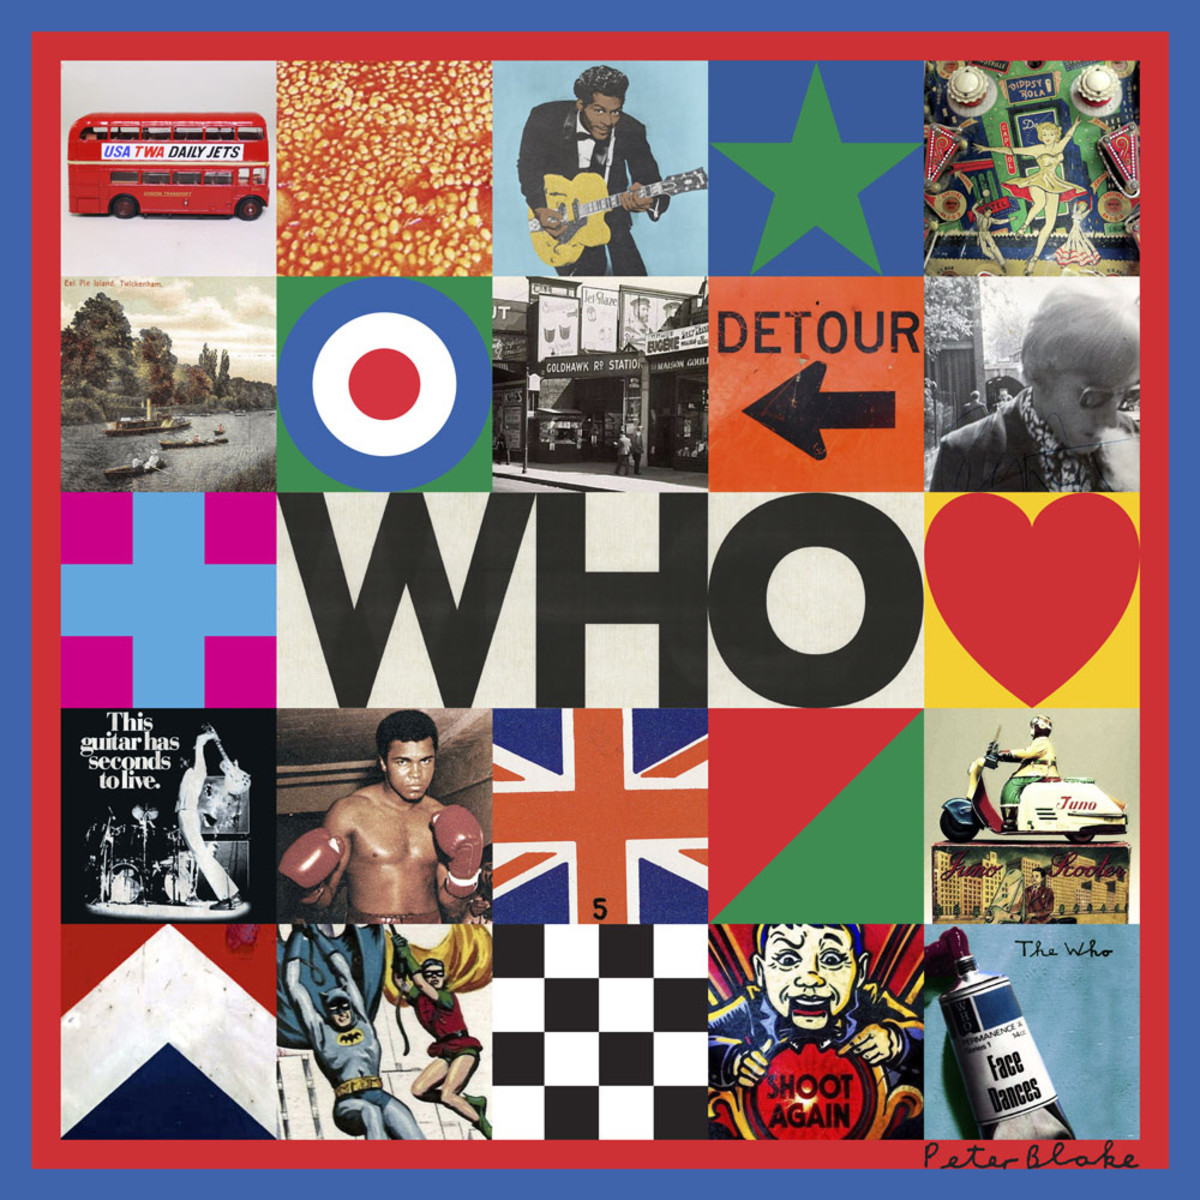 Get the 2019 album 'The Who' as a 2-LP vinyl set in the Goldmine shop by clicking above.